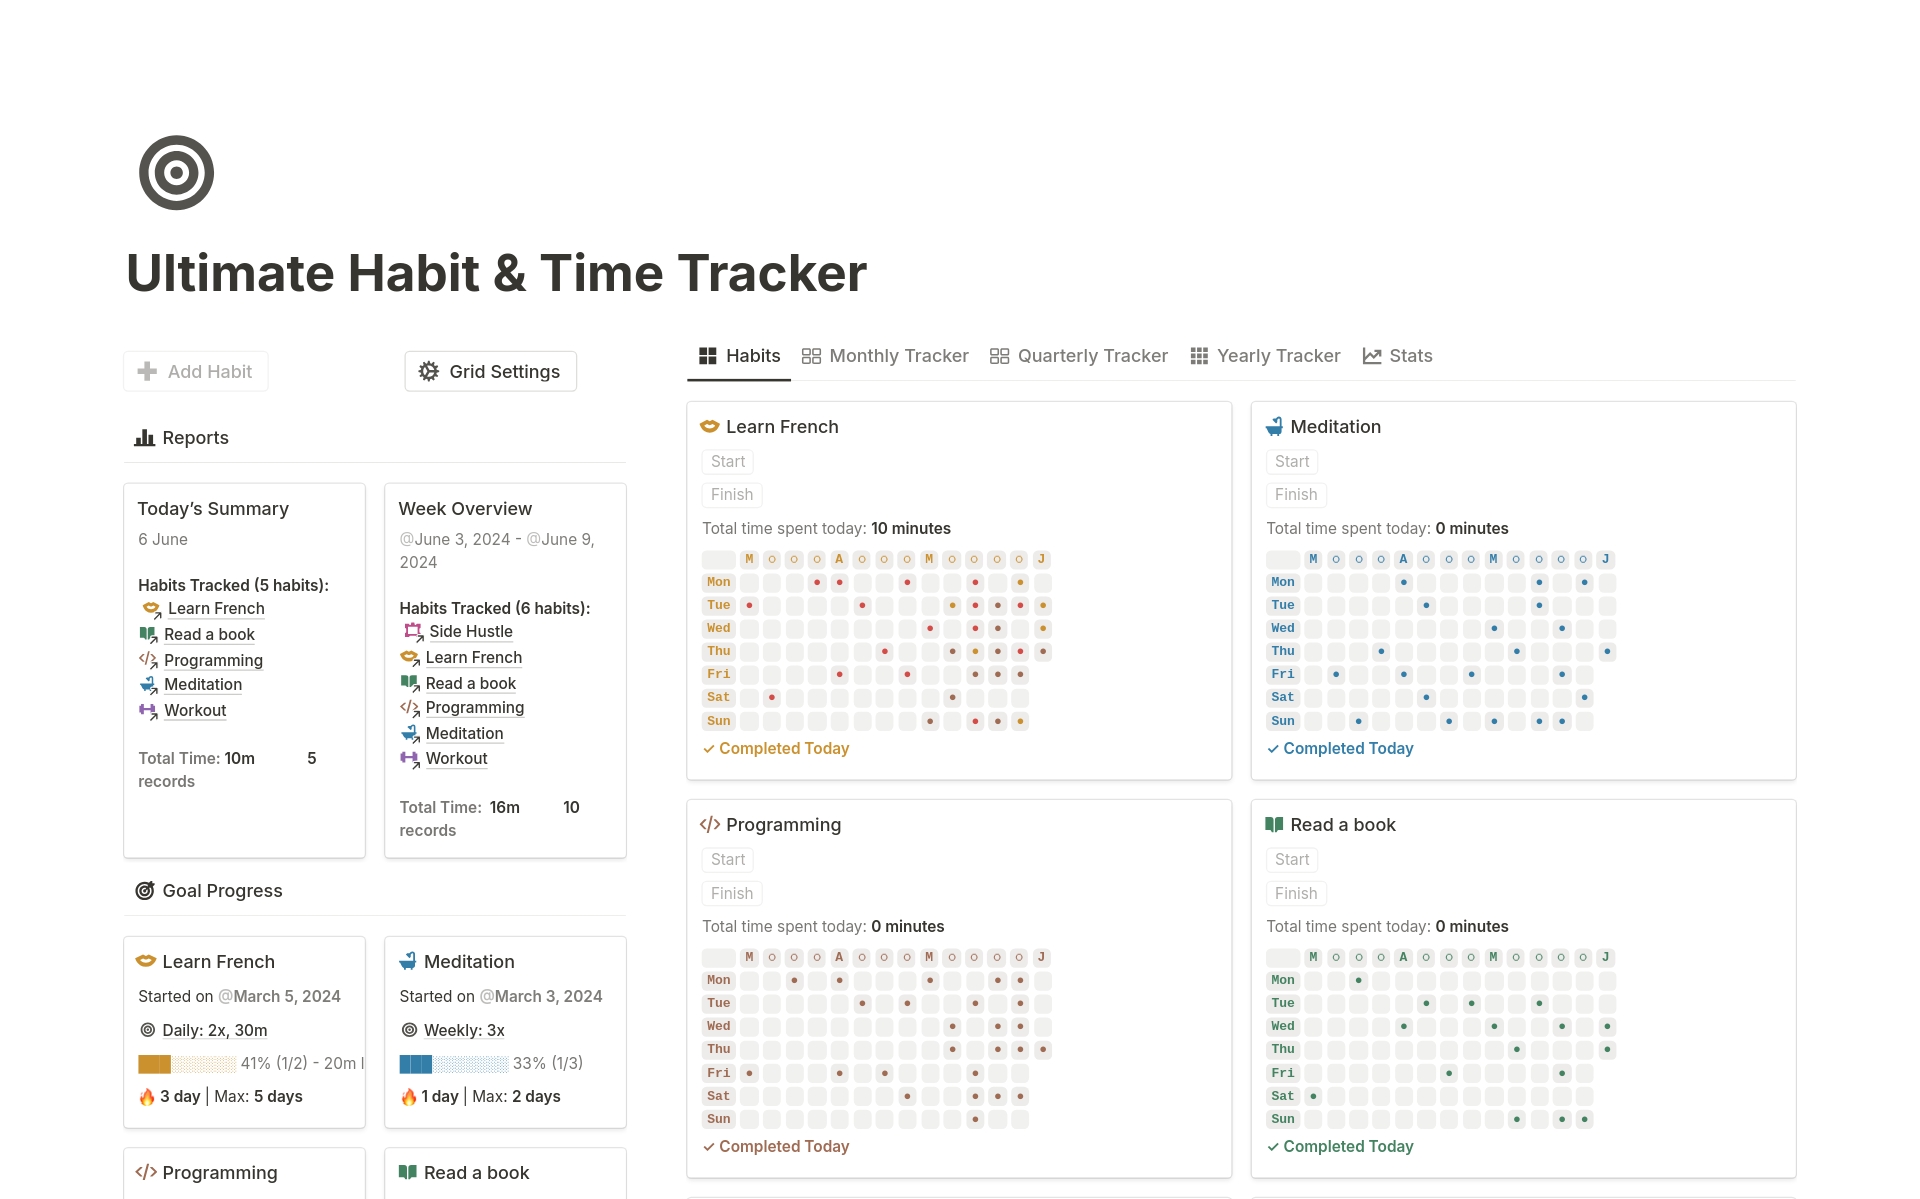 Track your habits and time easily with our unique Heatmap Grid! One-Click habit tracking to build a better you. Set goals, log your progress, and watch your streaks grow. No more excuses – start building the life you want, one click at a time.